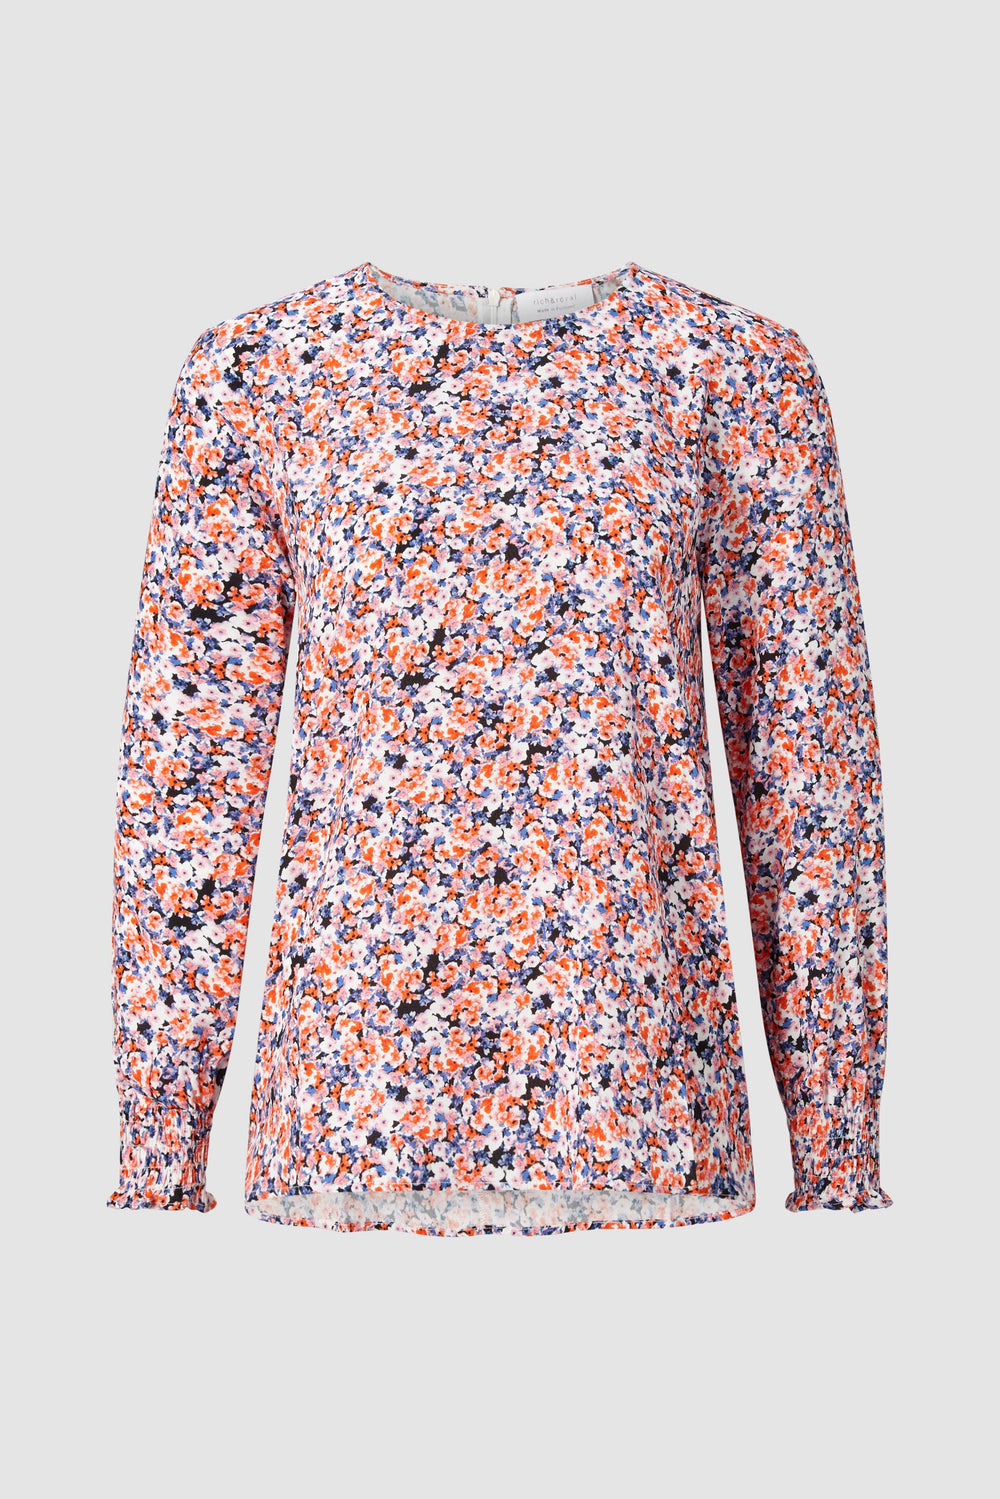 Rich & Royal - Floral Printed Blouse - Flame